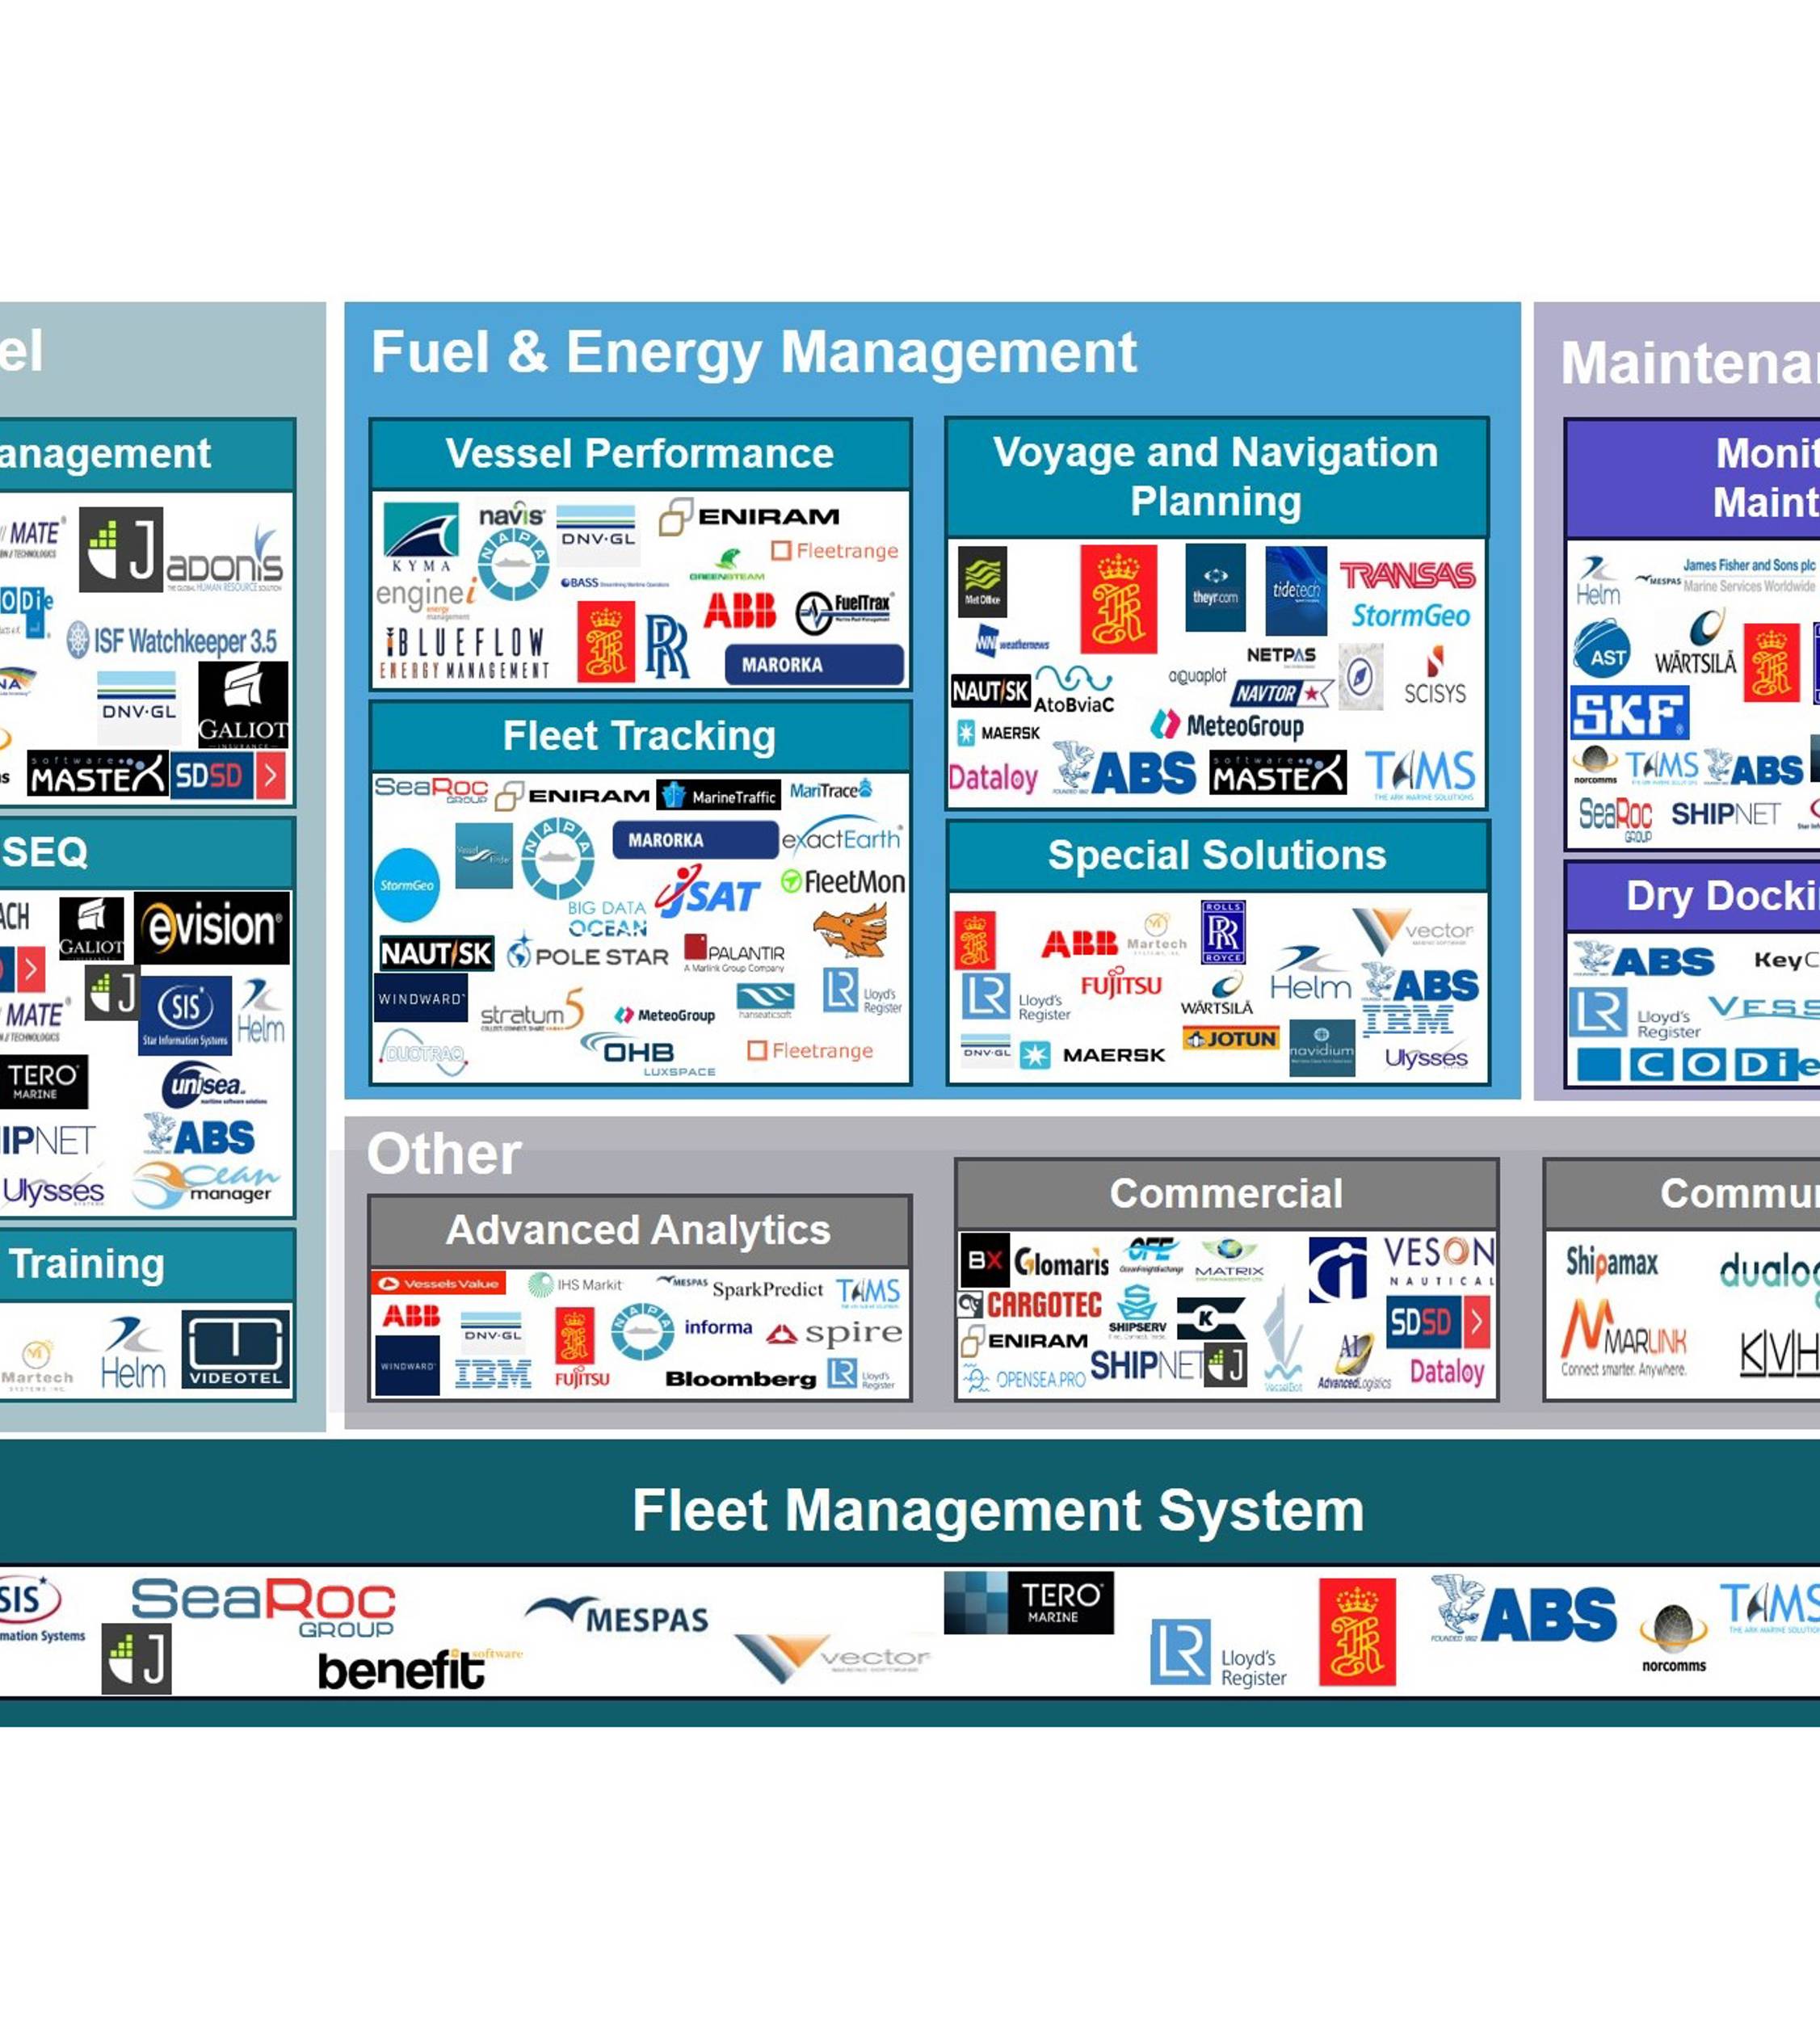 Logowall of companies in maritime ecosystem